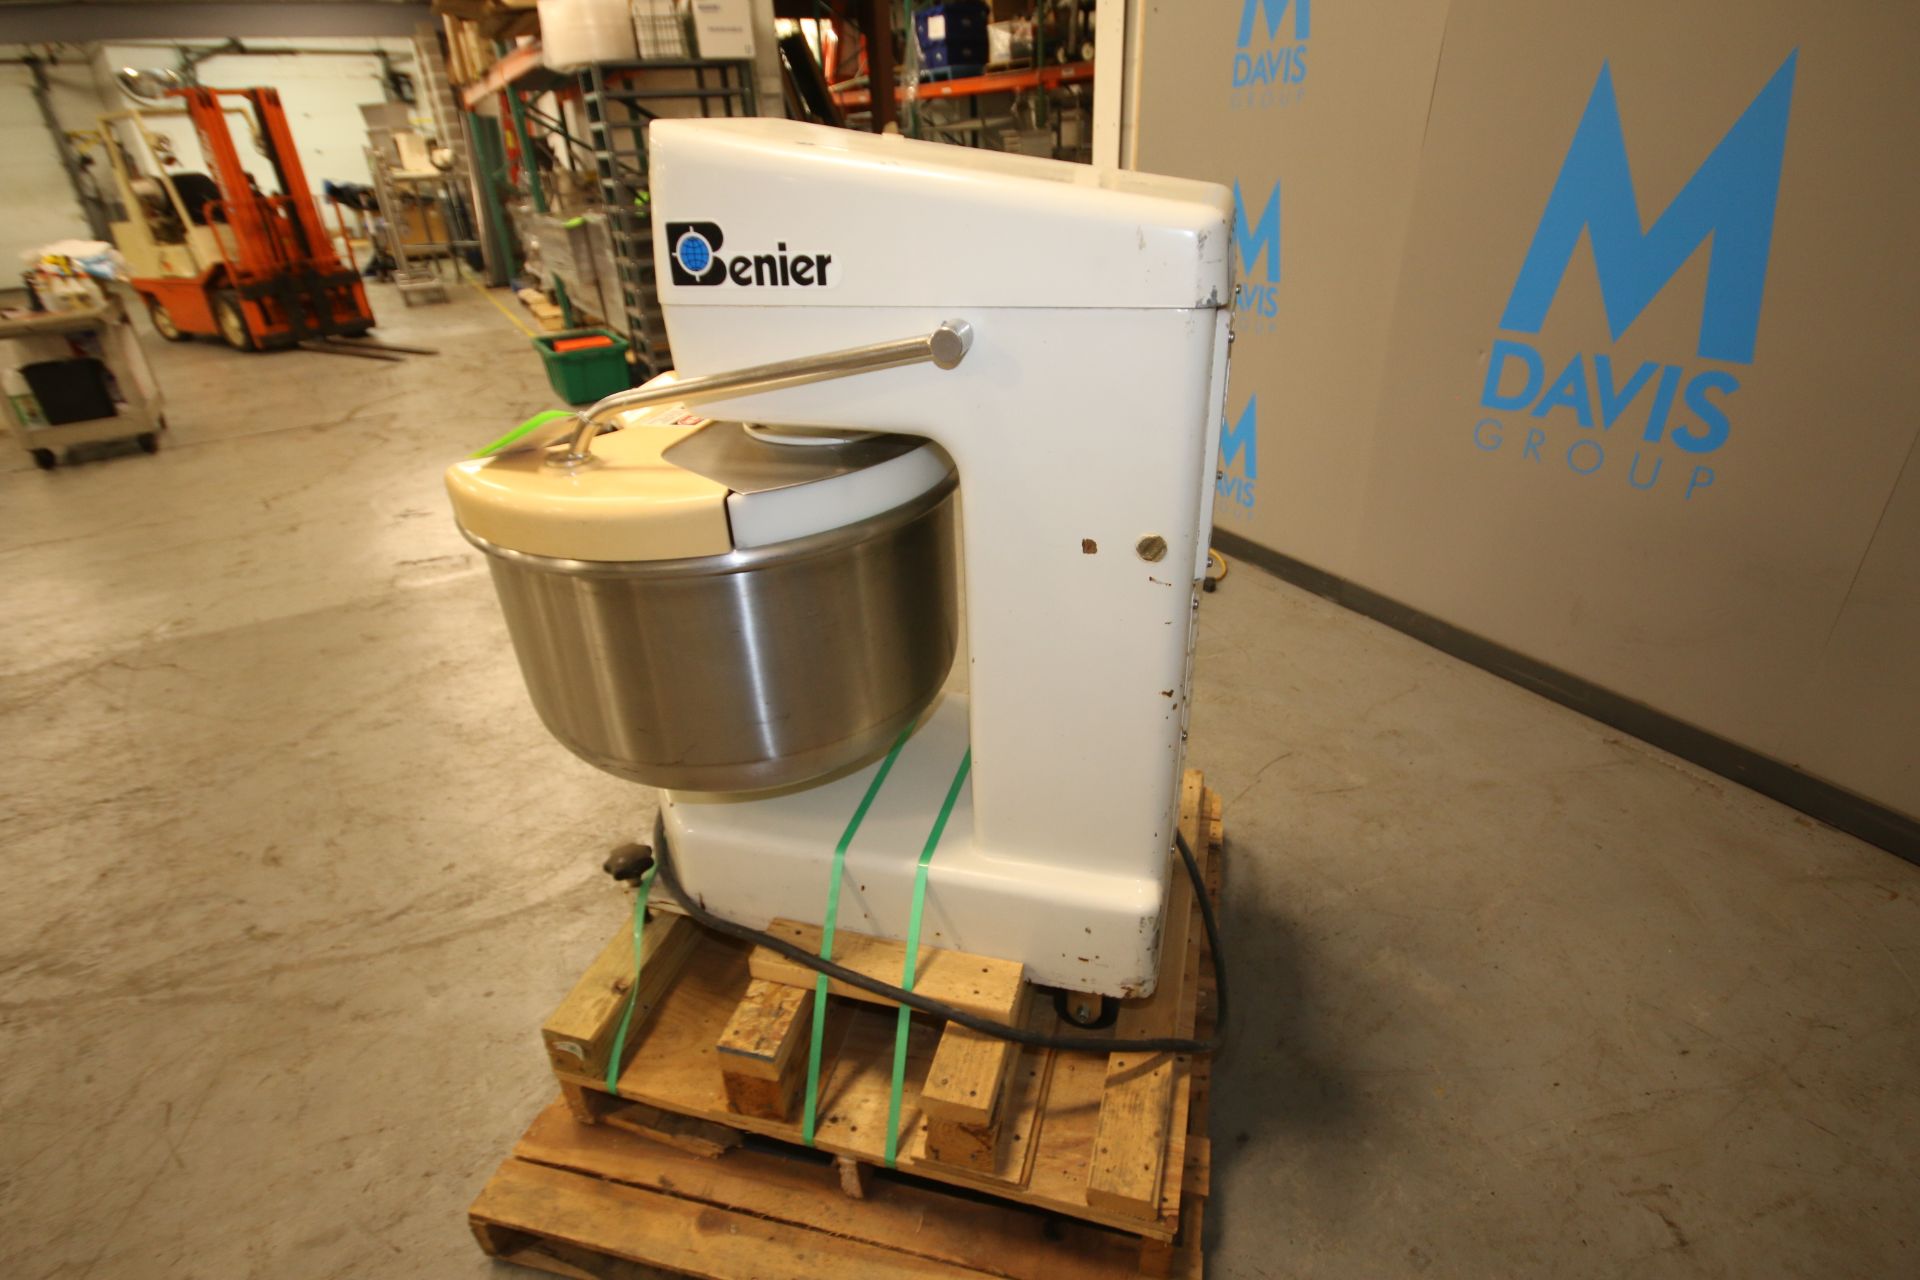 Benier Diosna Spiral Mixer, Model Mach. Type SP 80 D, SN 9614 - 2964, with 25" W x 15" H S/S - Image 7 of 9